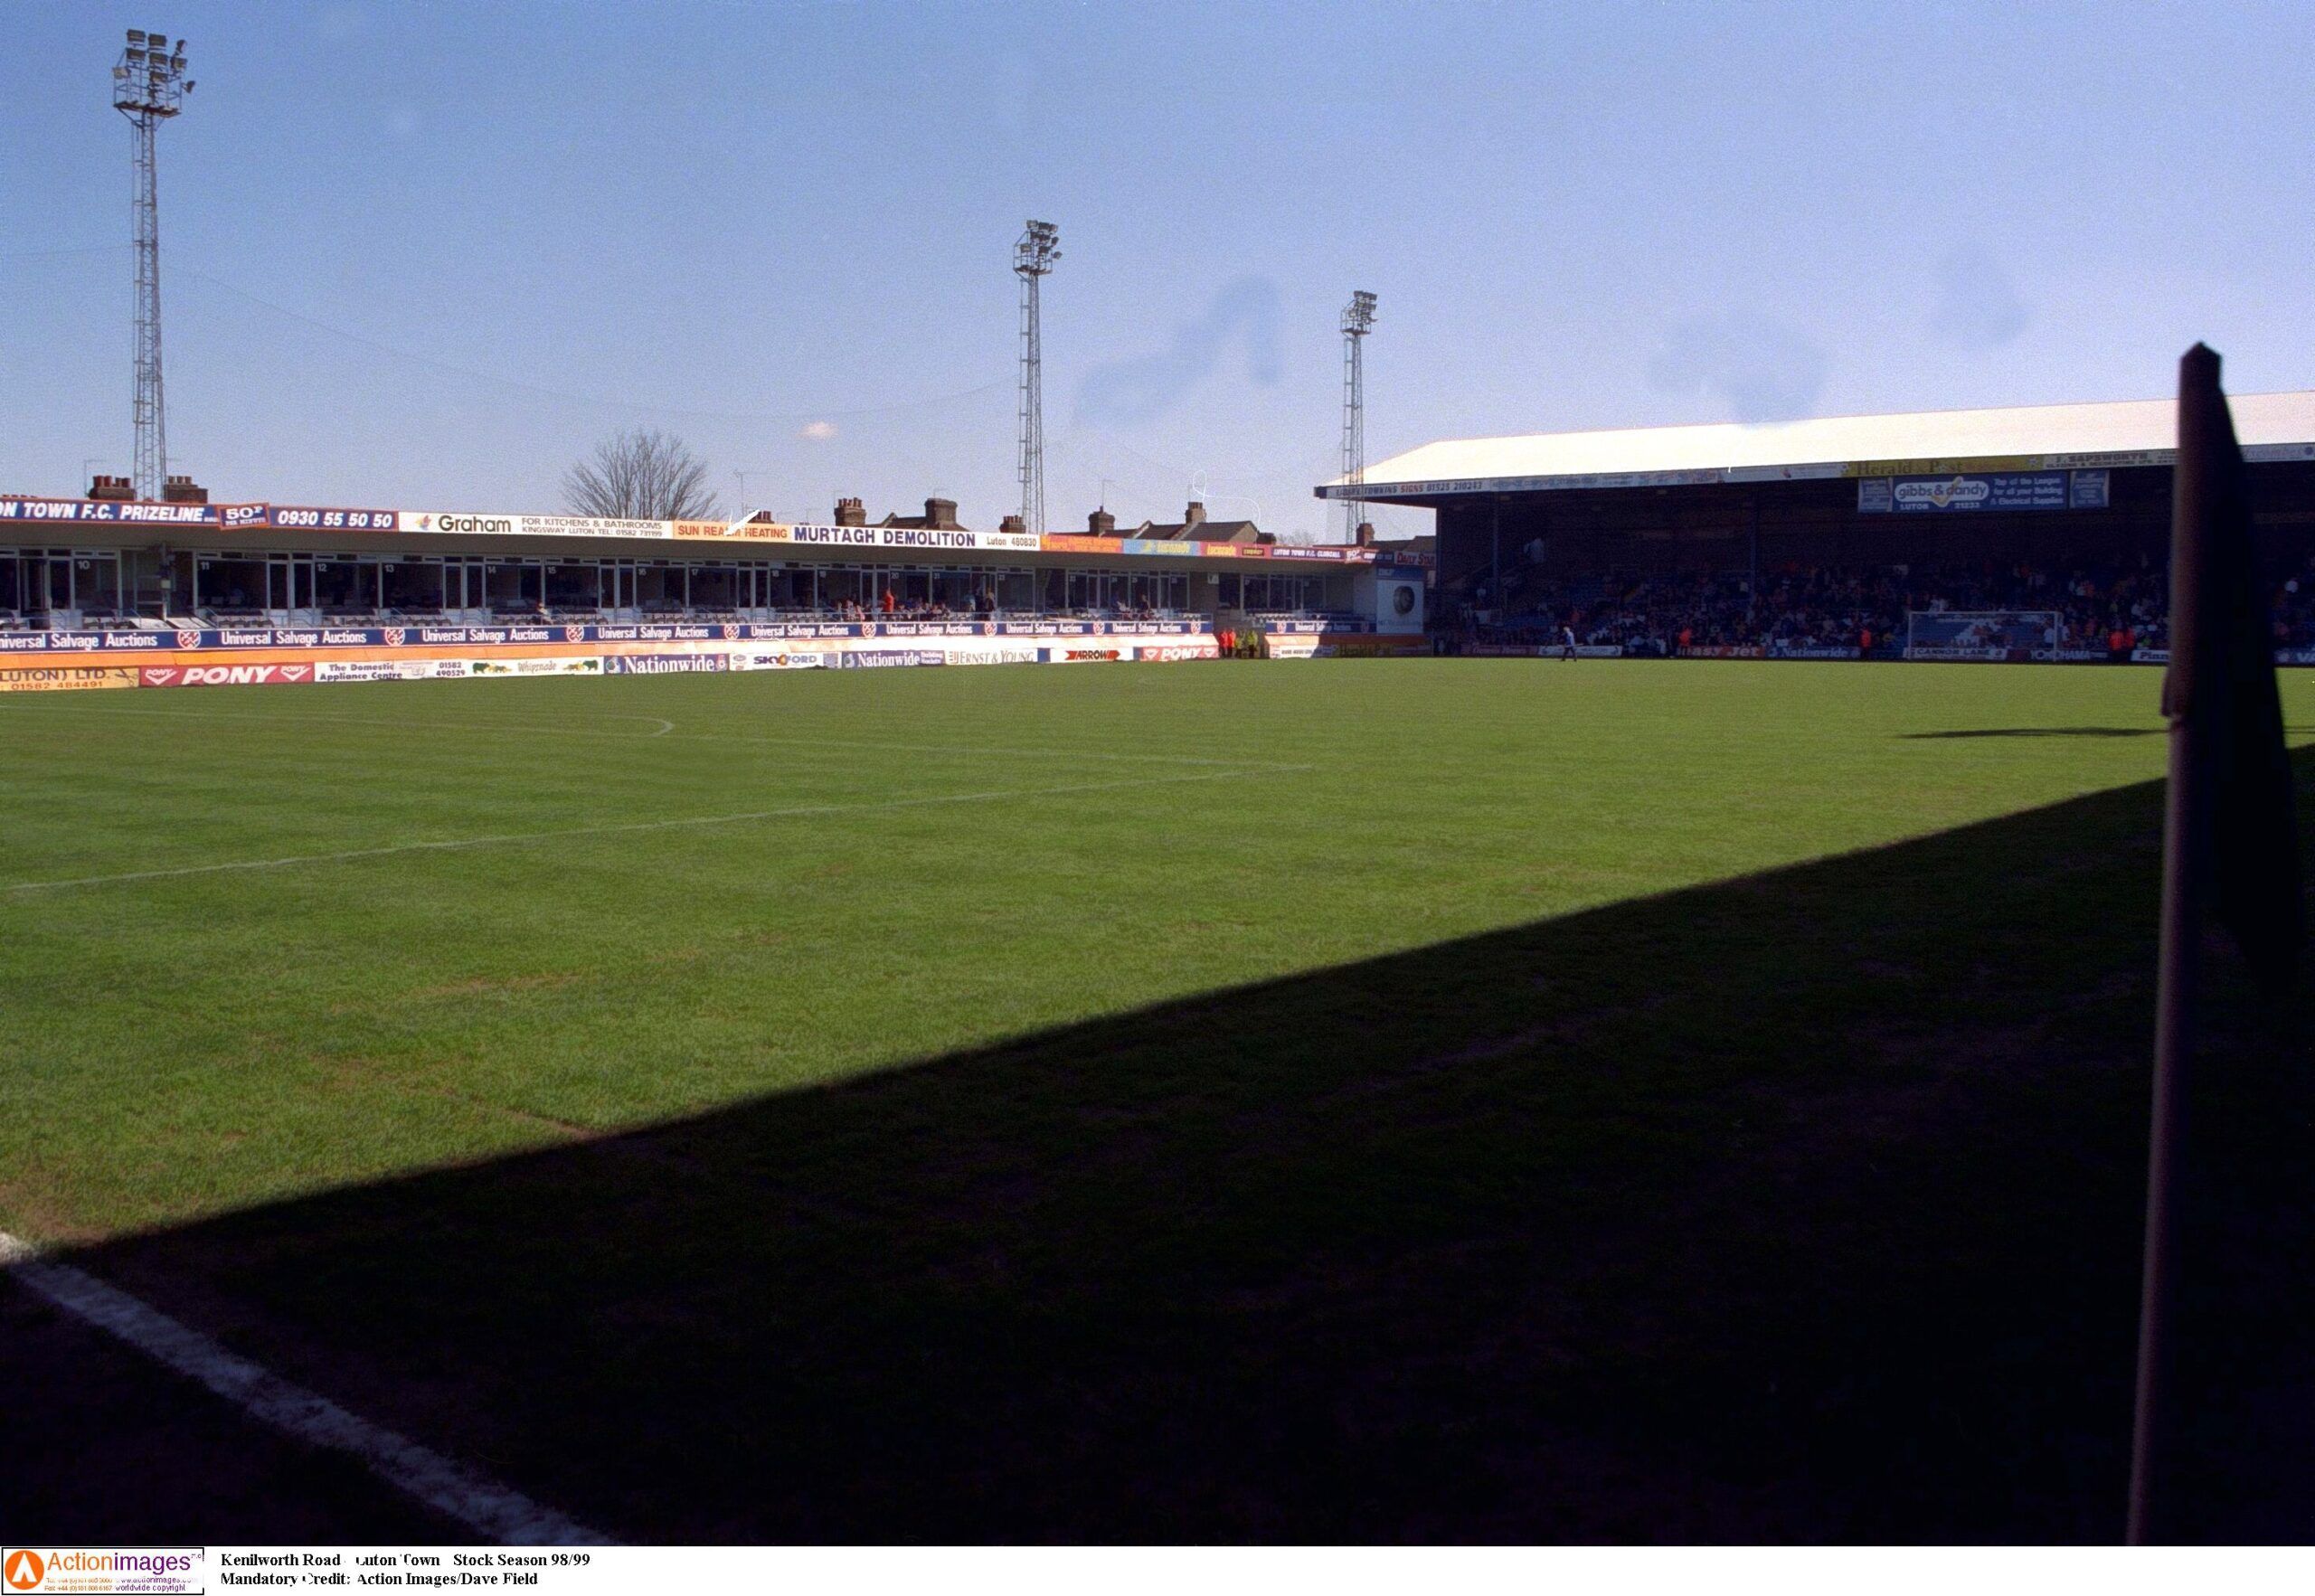 Kenilworth Road - Luton Town - Stock Season 98/99 
Mandatory Credit: Action Images/Dave Field